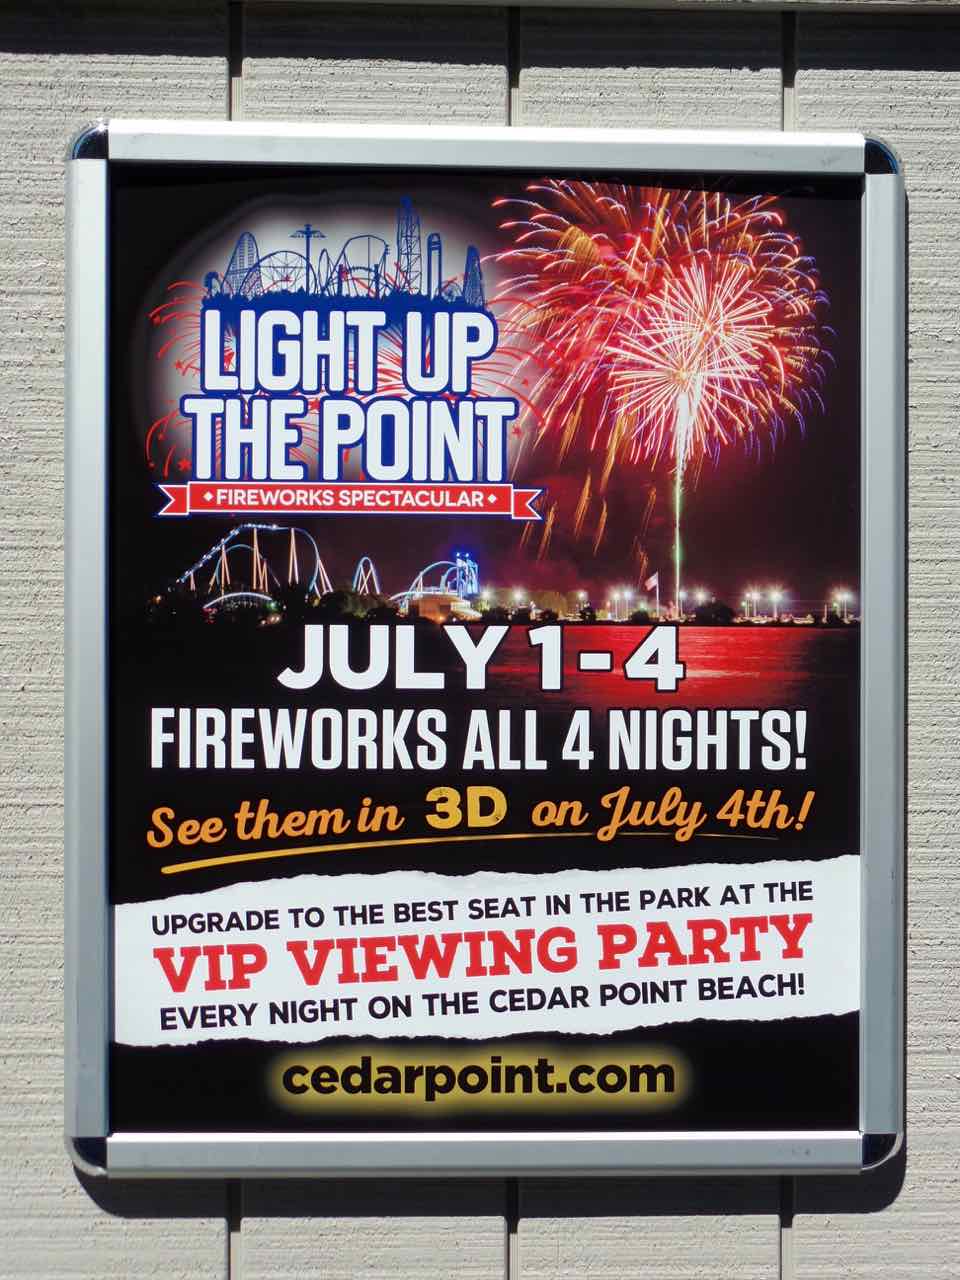 Cedar Point Amusement Park advertisement: July 1 - 4, Fireworks All 4 Nights! See them in 3D on July 4th!